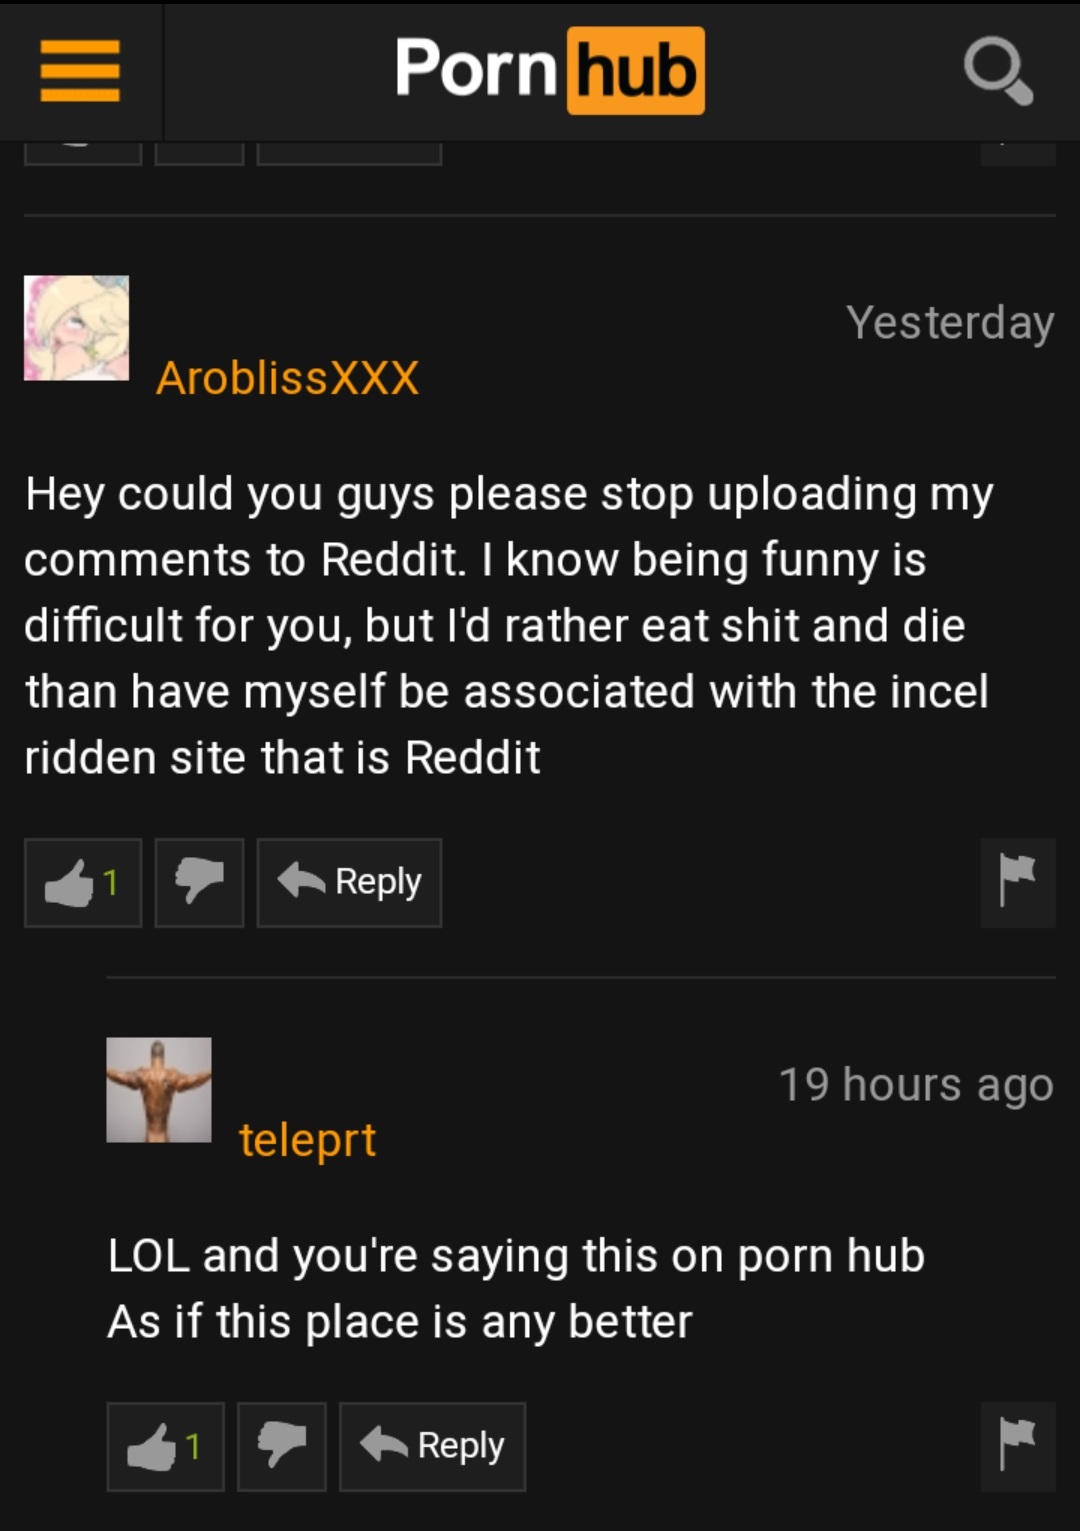 screenshot - Porn hub Yesterday Arobliss Xxx Hey could you guys please stop uploading my to Reddit. I know being funny is difficult for you, but I'd rather eat shit and die than have myself be associated with the incel ridden site that is Reddit 19 hours 